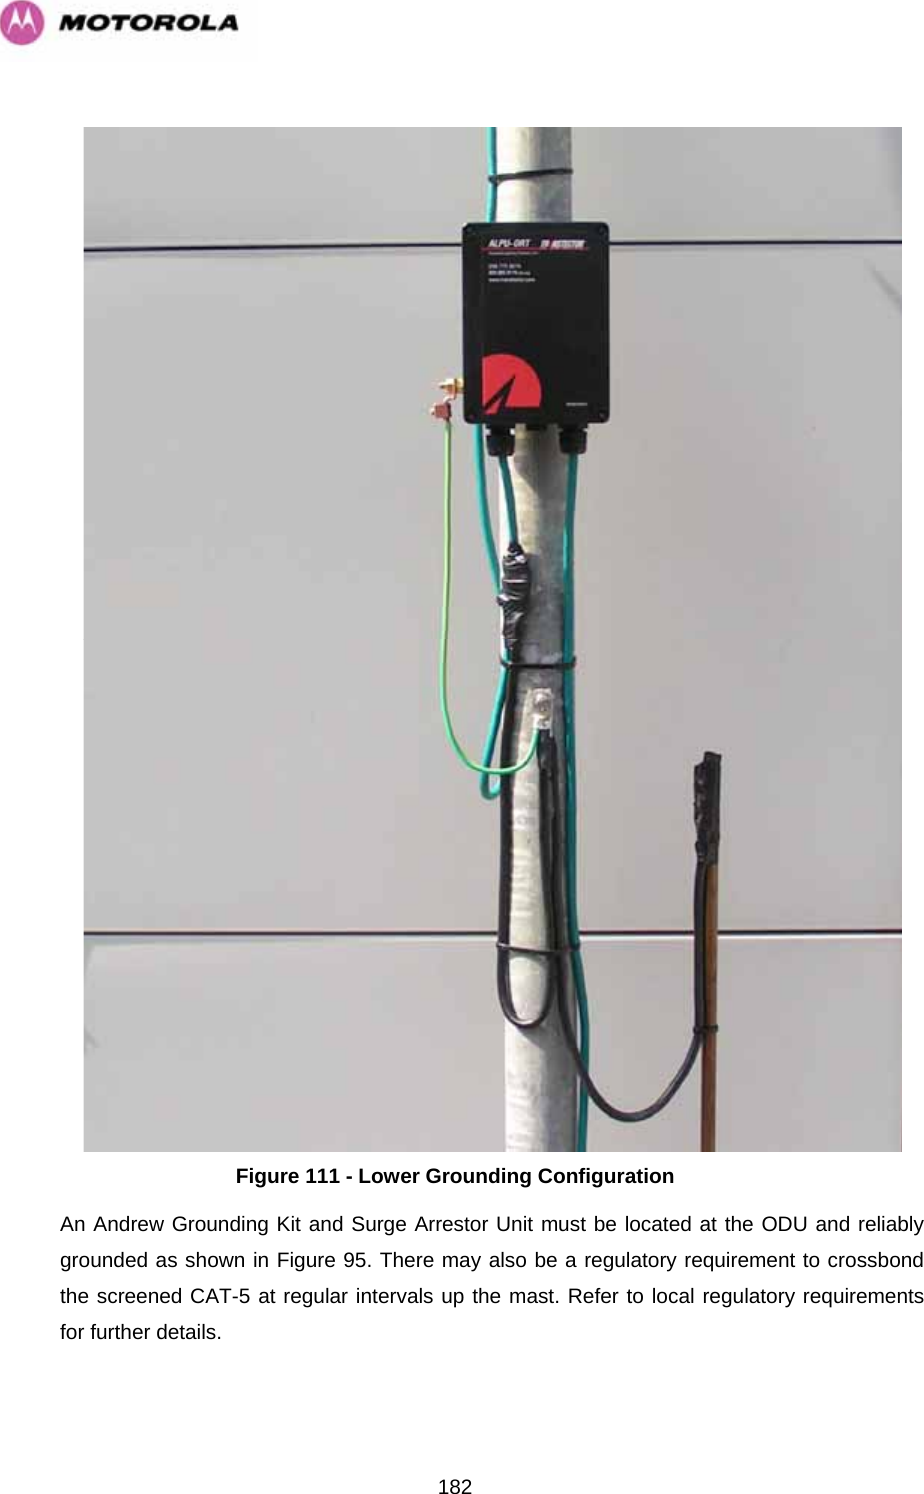   182   Figure 111 - Lower Grounding Configuration An Andrew Grounding Kit and Surge Arrestor Unit must be located at the ODU and reliably grounded as shown in Figure 95. There may also be a regulatory requirement to crossbond the screened CAT-5 at regular intervals up the mast. Refer to local regulatory requirements for further details.  